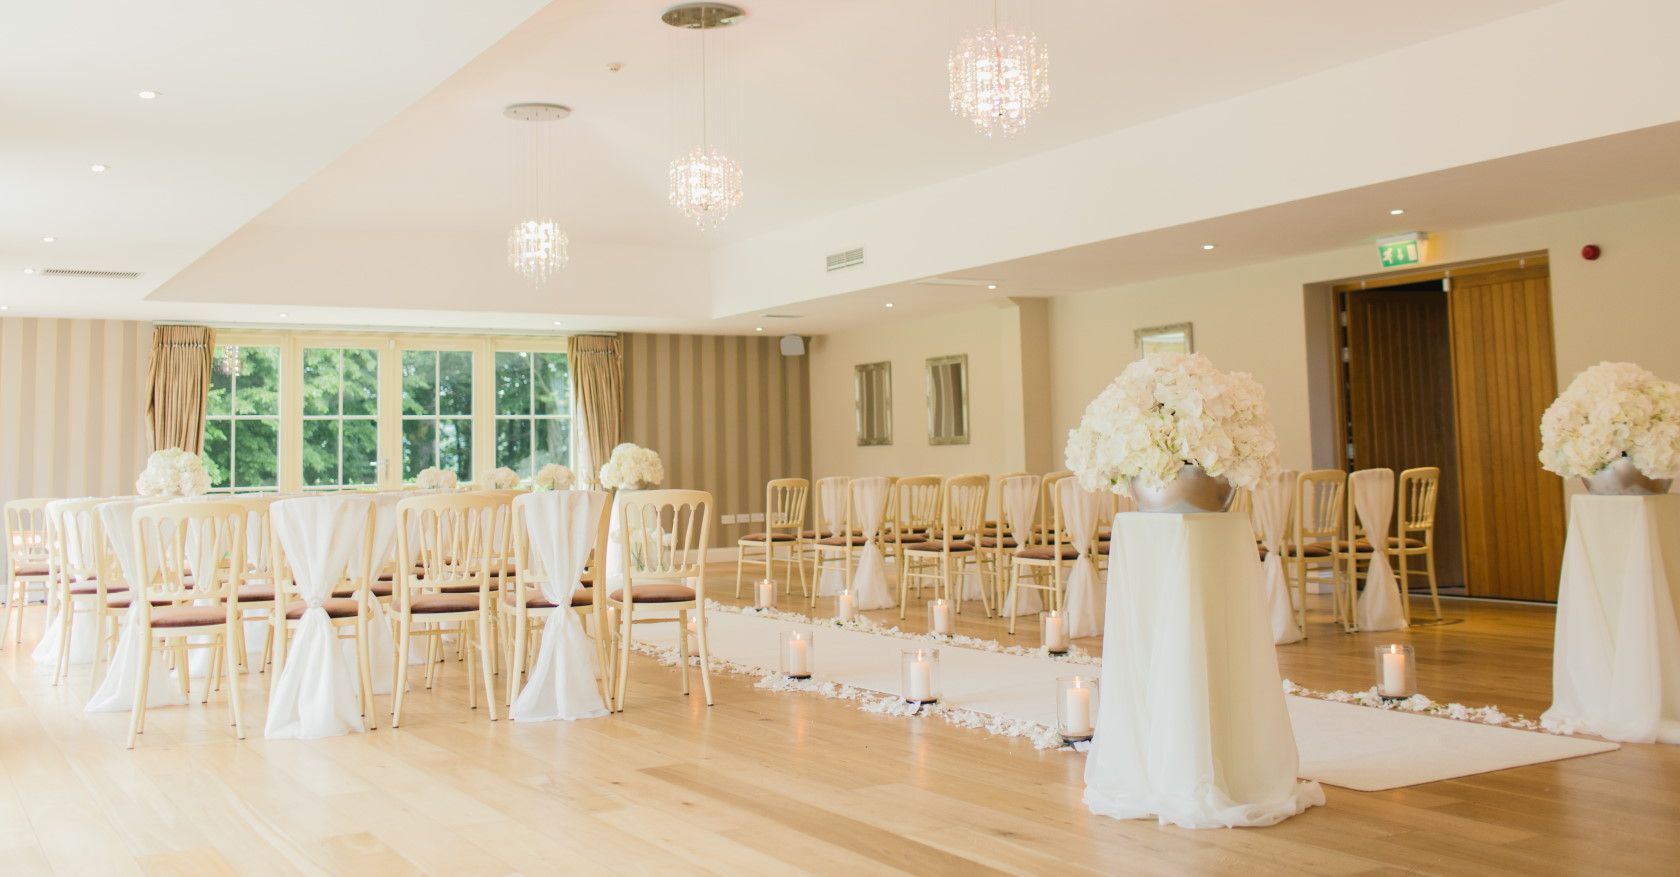 indoor wedding venue with flowers and white decorations